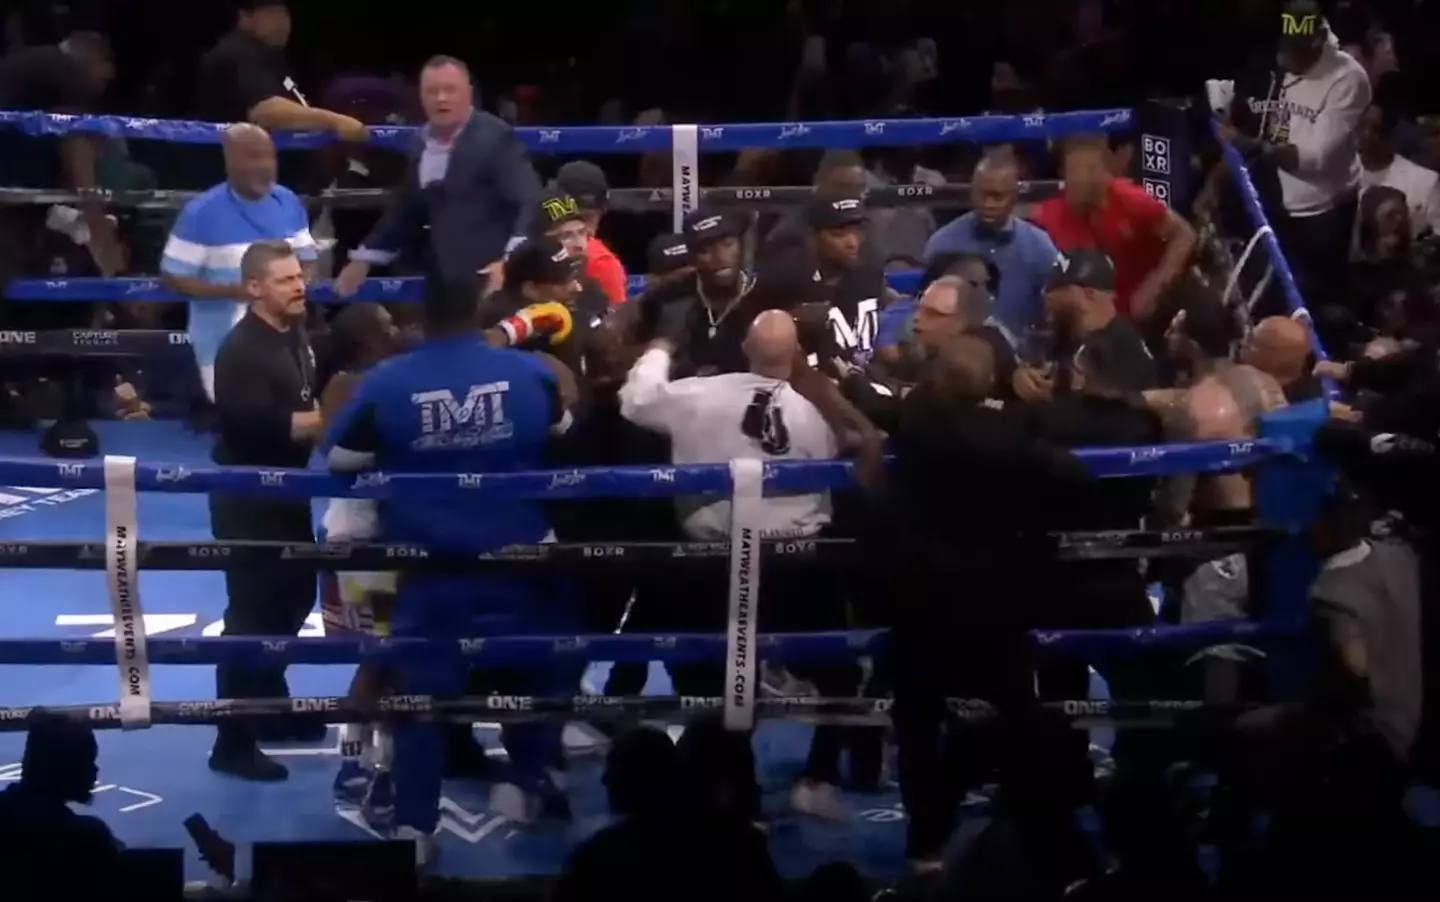 The post-match antics were more entertaining that the fight itself.